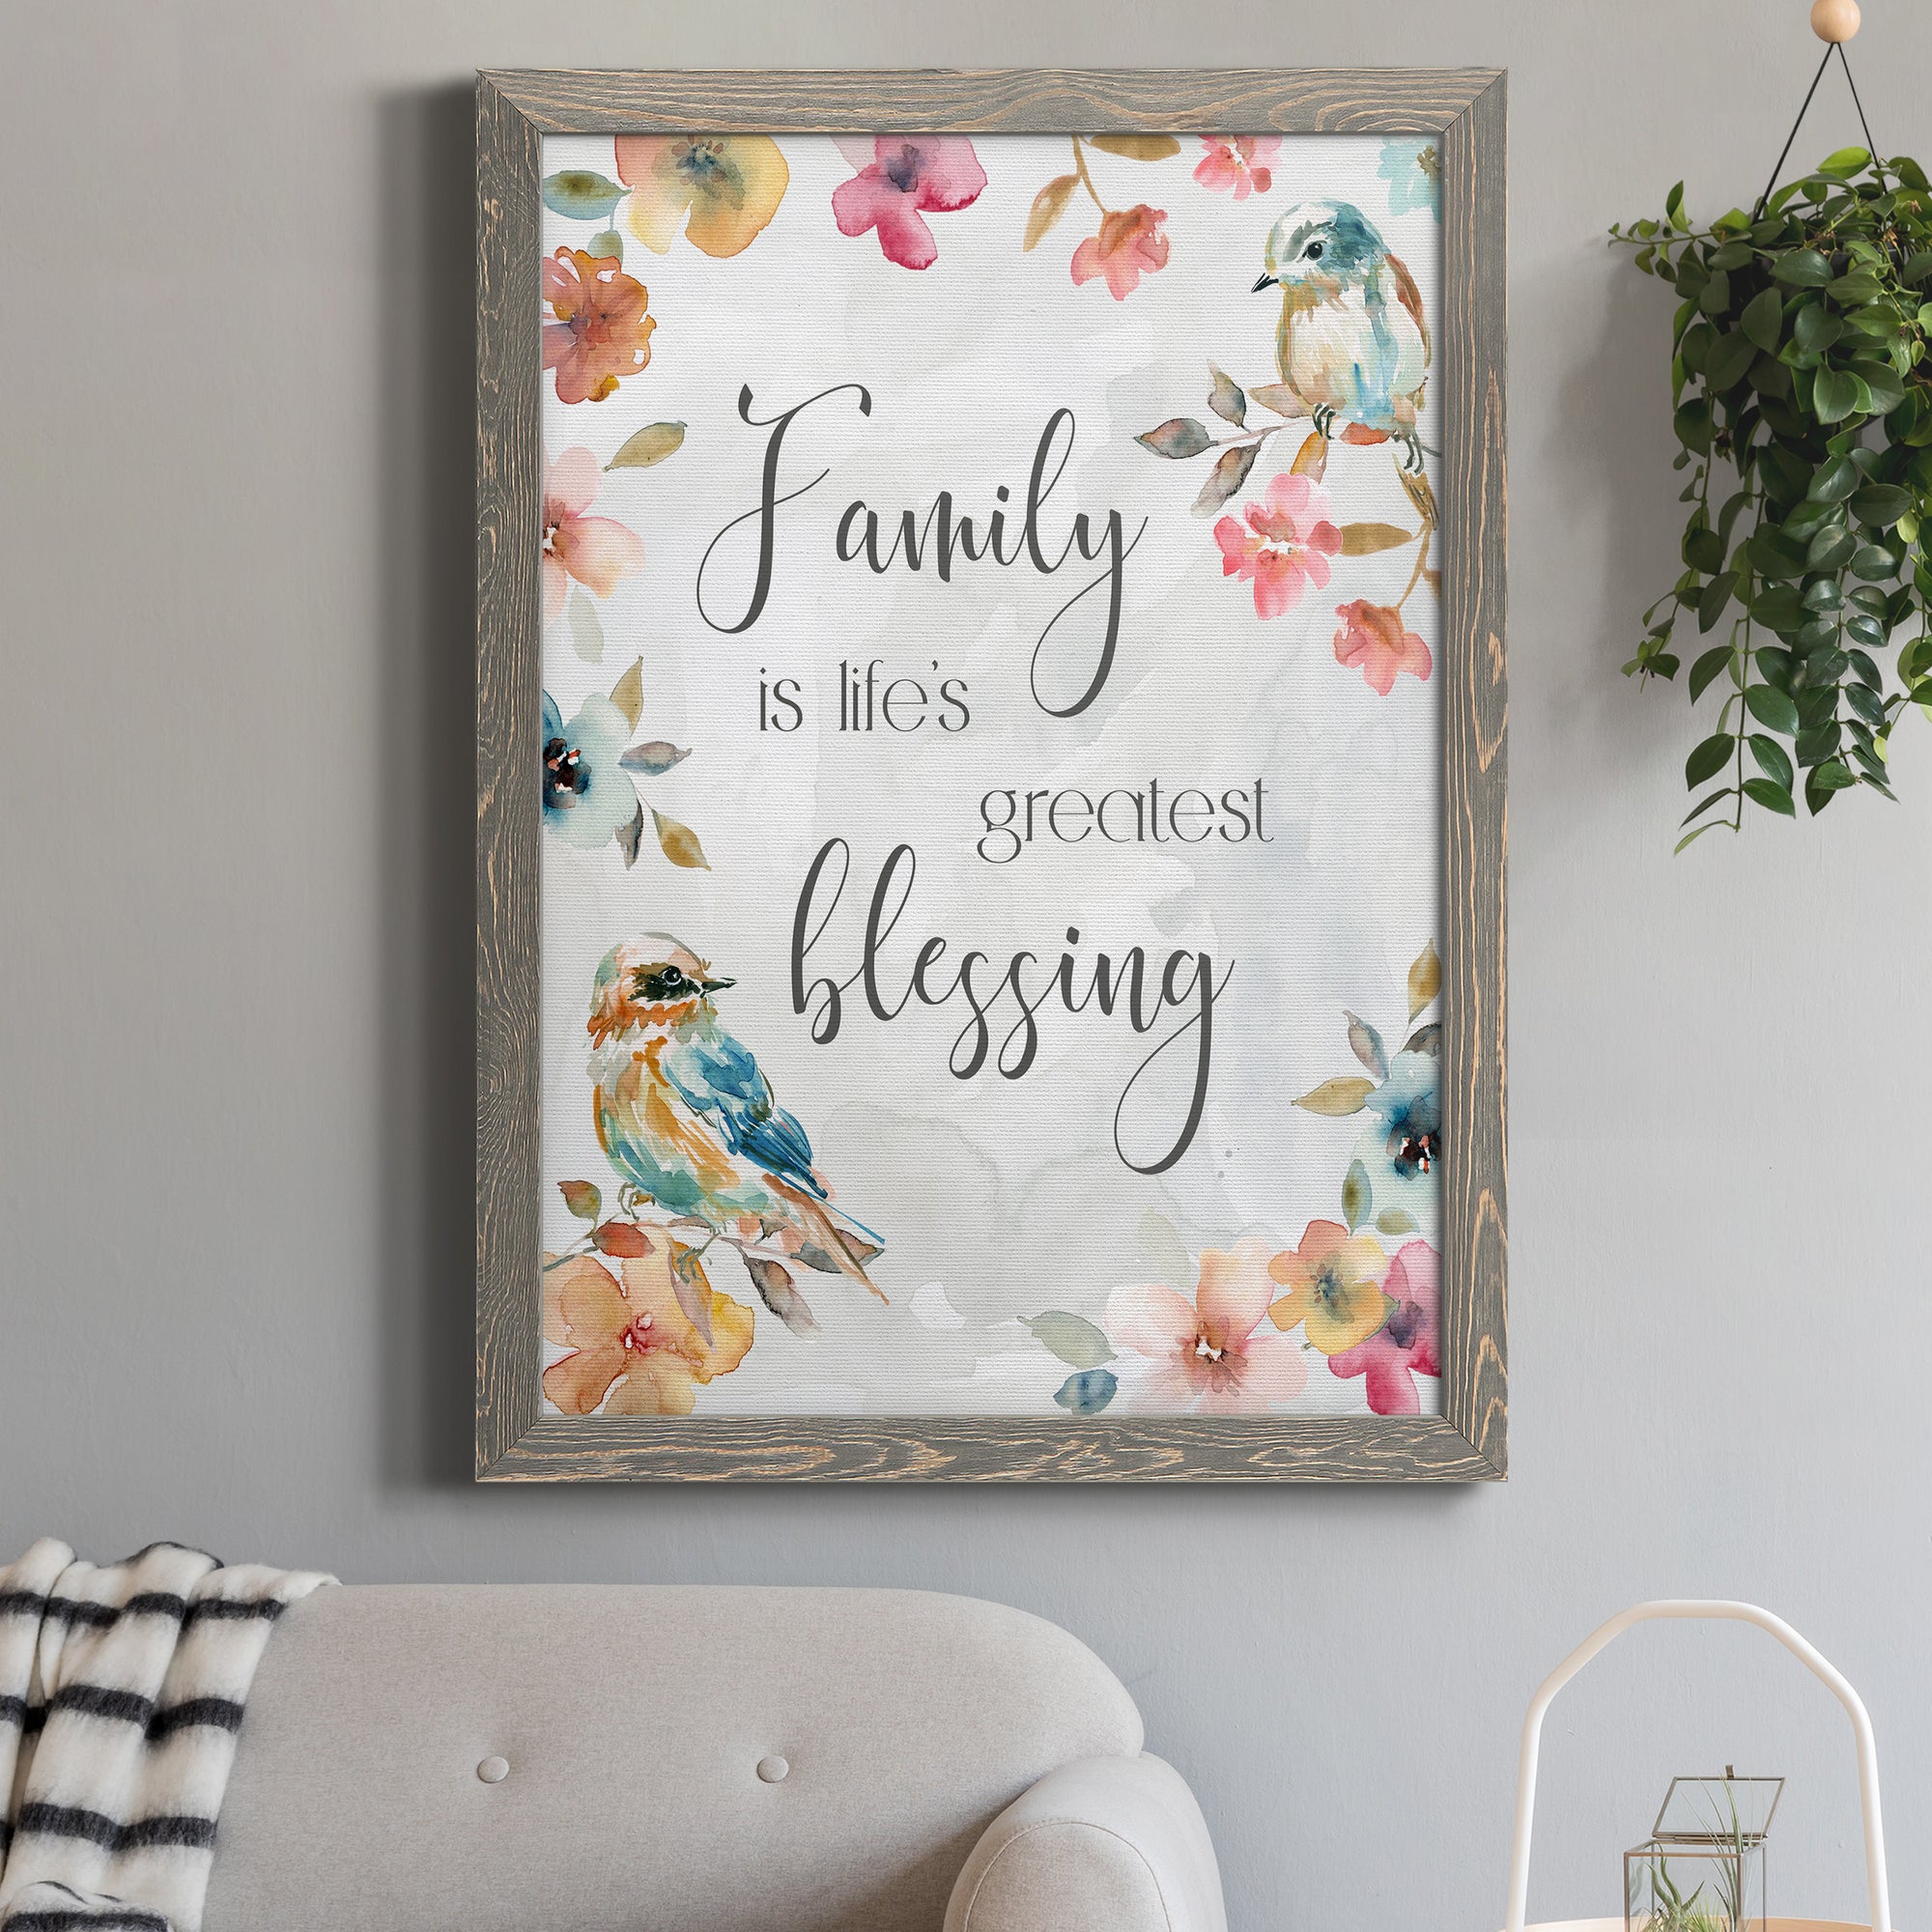 Spring Bird Blessing - Premium Canvas Framed in Barnwood - Ready to Hang